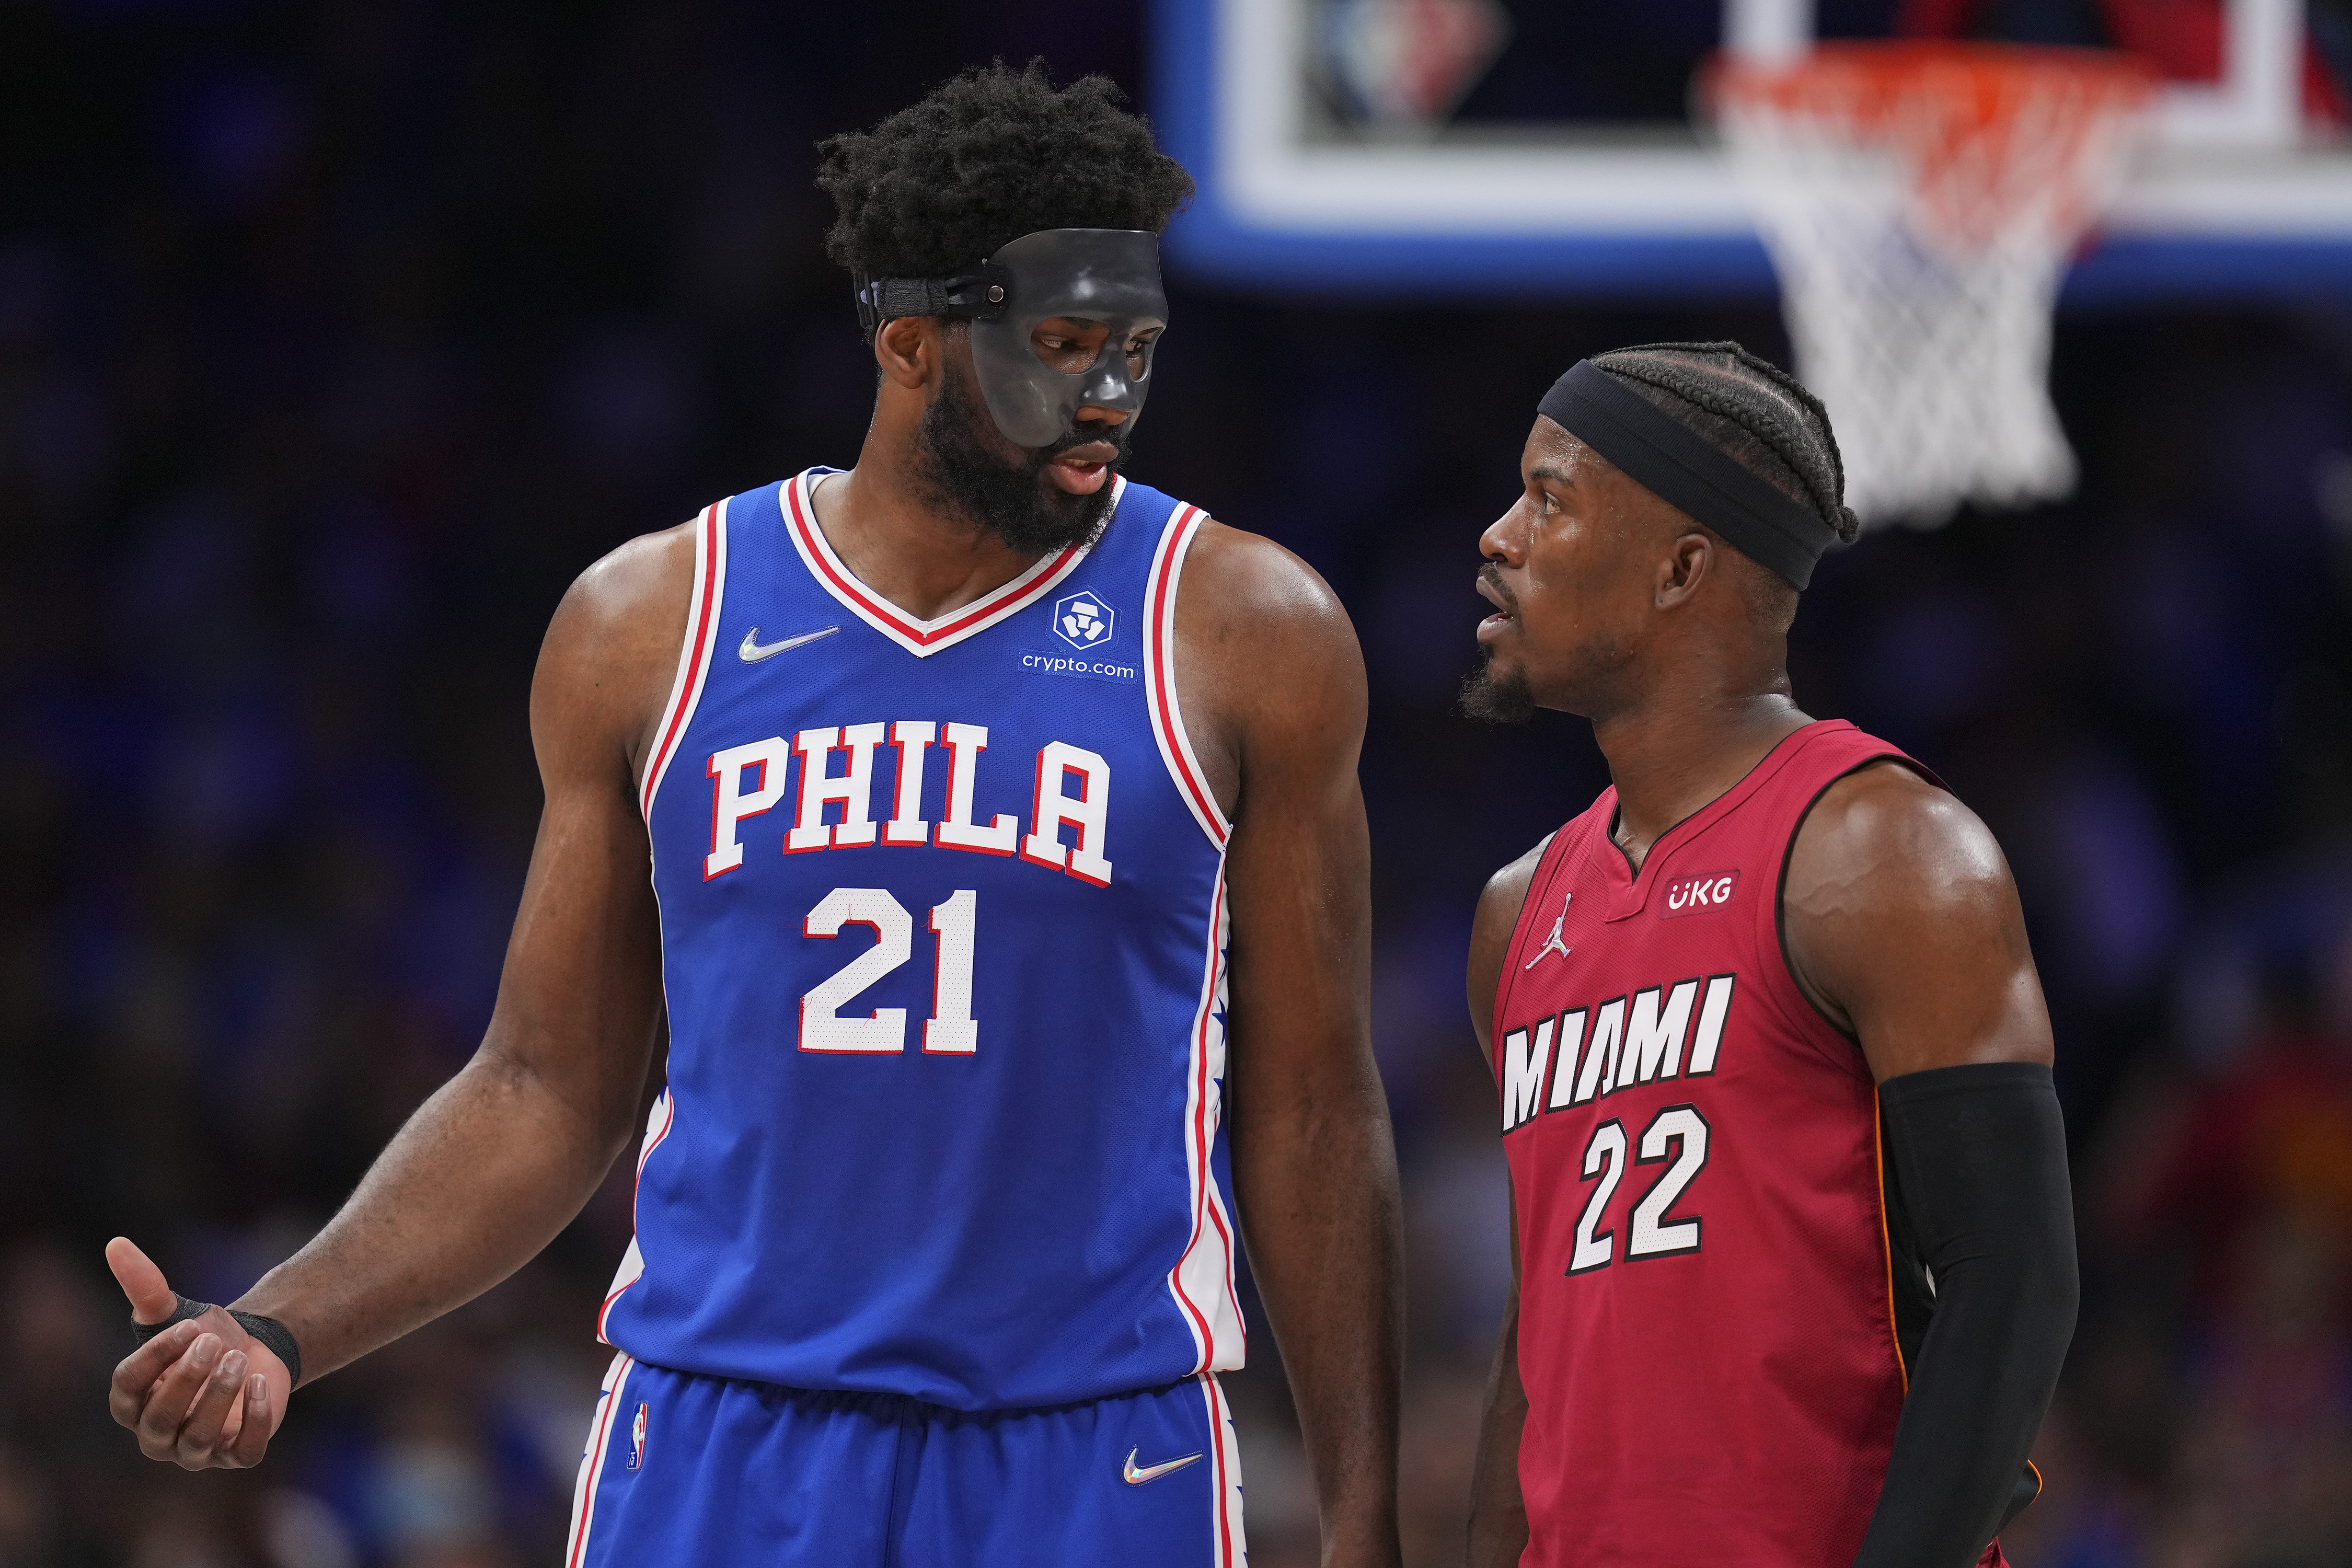 Joel Embiid and the mask make NBA playoff debut in Sixers' win over Heat